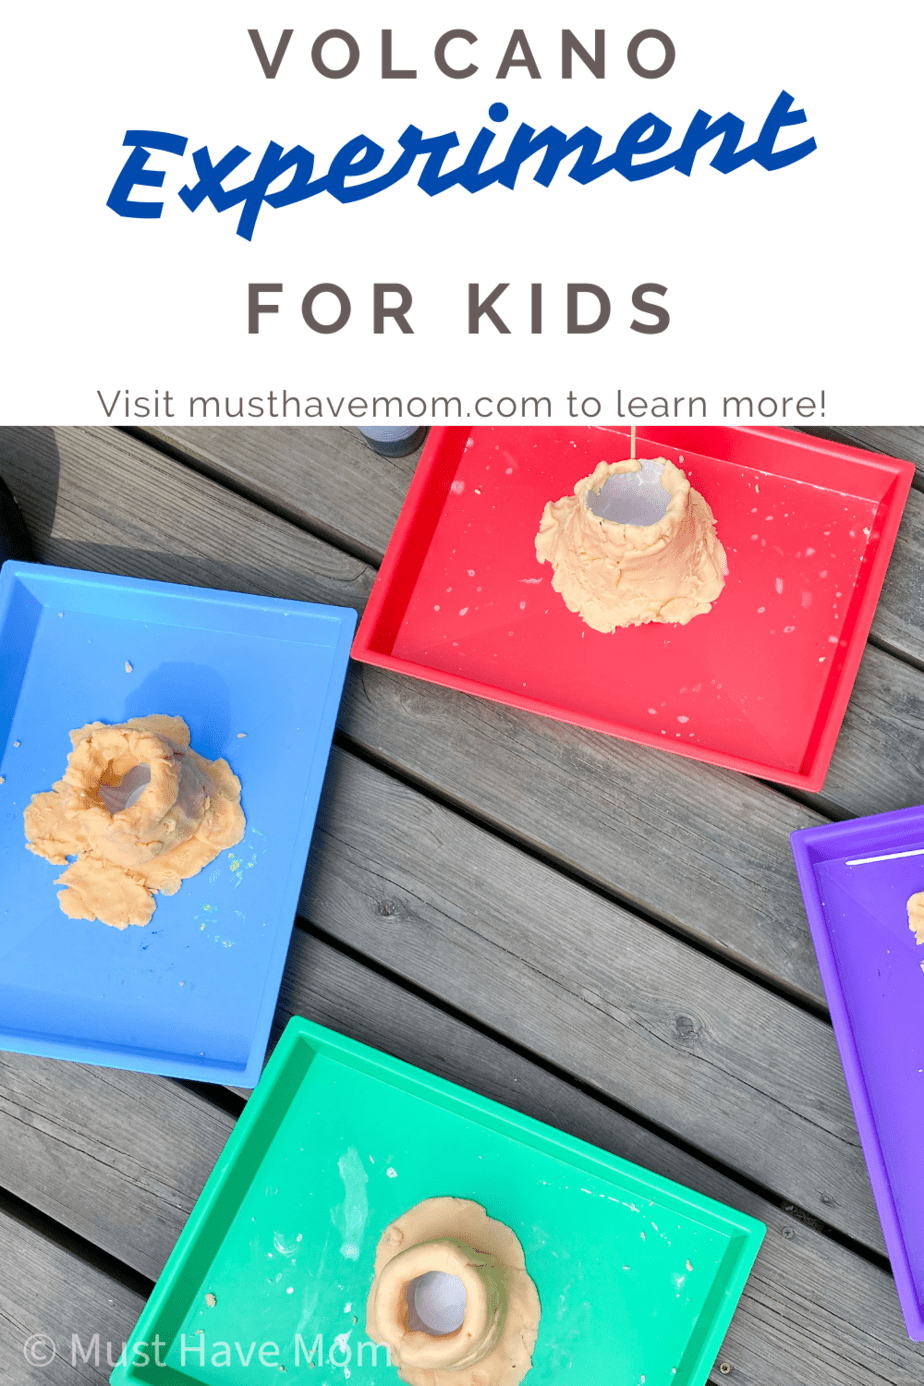 Volcano Experiment for Kids. Looking for a fun learning experiment for your kids? This volcano experiment for kids is so easy to make and provides a lot of fun. #musthavemom #kids #experiment